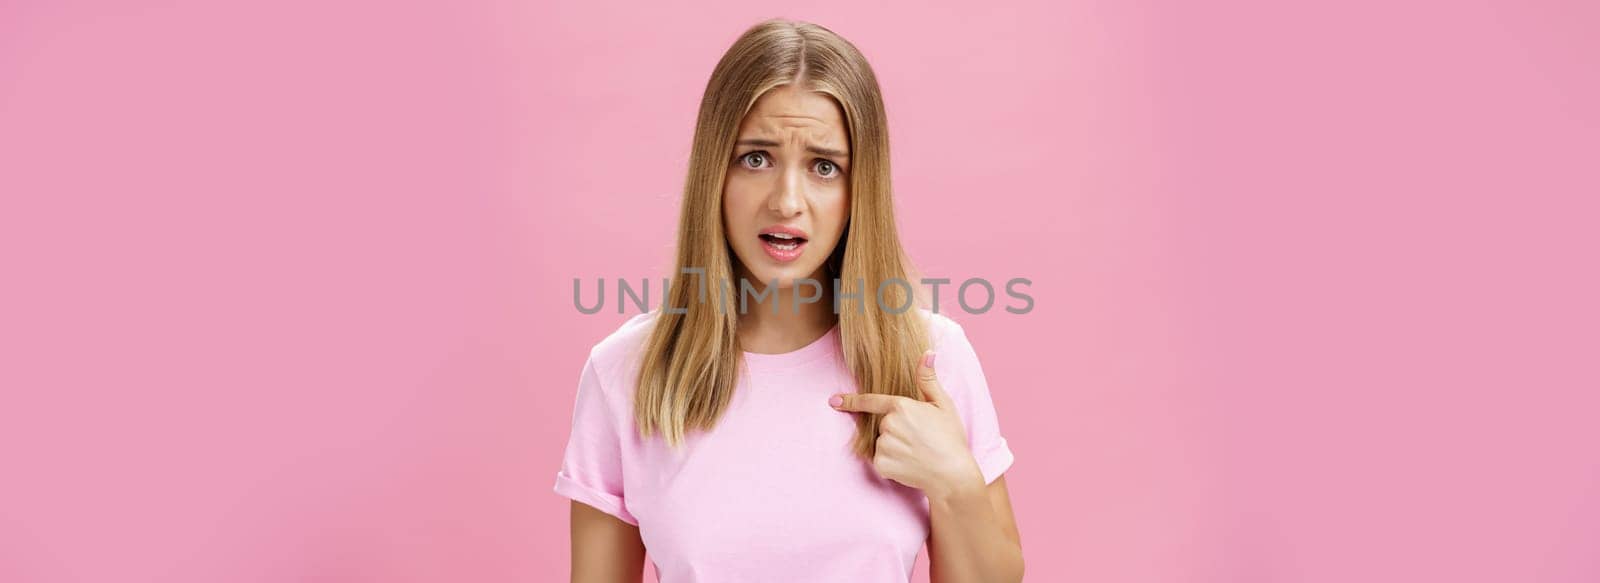 Insulted girl pointing at herself with displeased pissed and questioned expression asking question being shocked she picked or accused in something terrible and disrespectful posing against pink wall. Lifestyle.